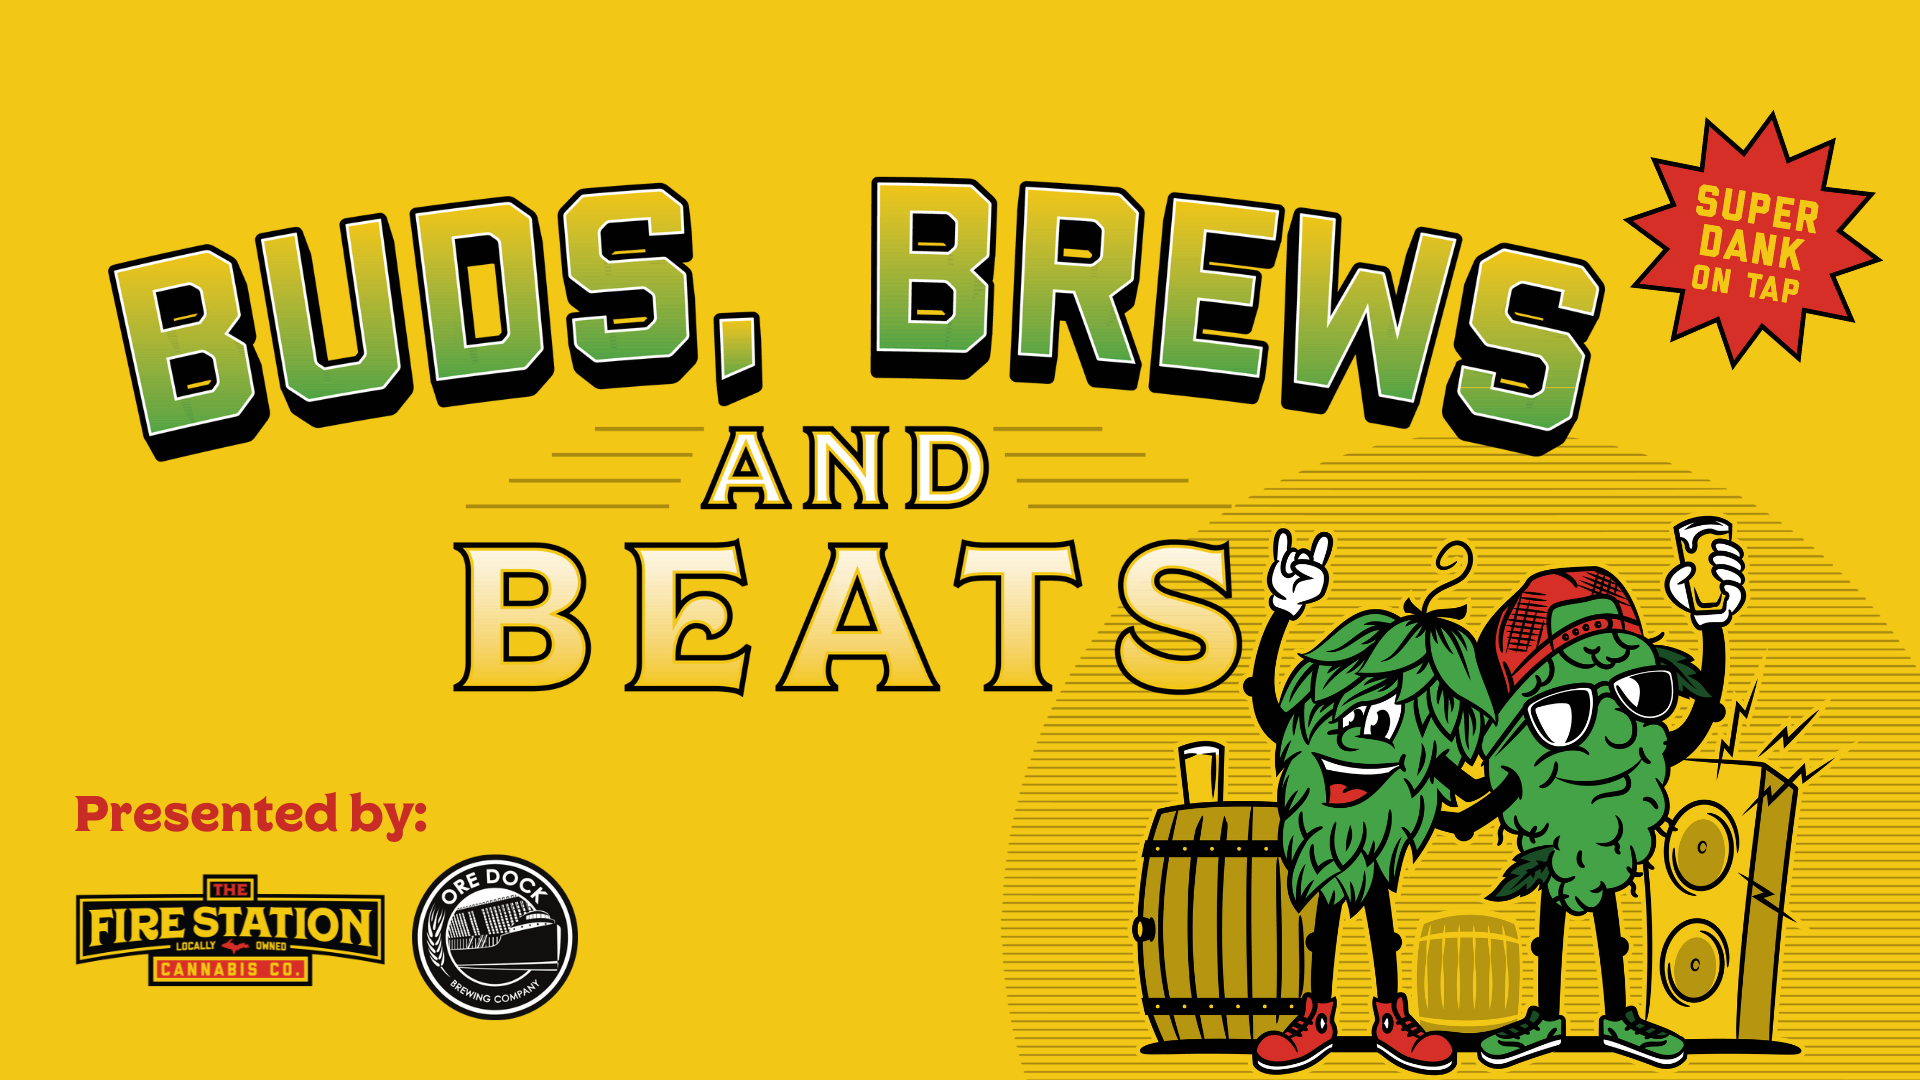 Buds, Brews, and Beats fundraiser graphic. $5 Cover Charge